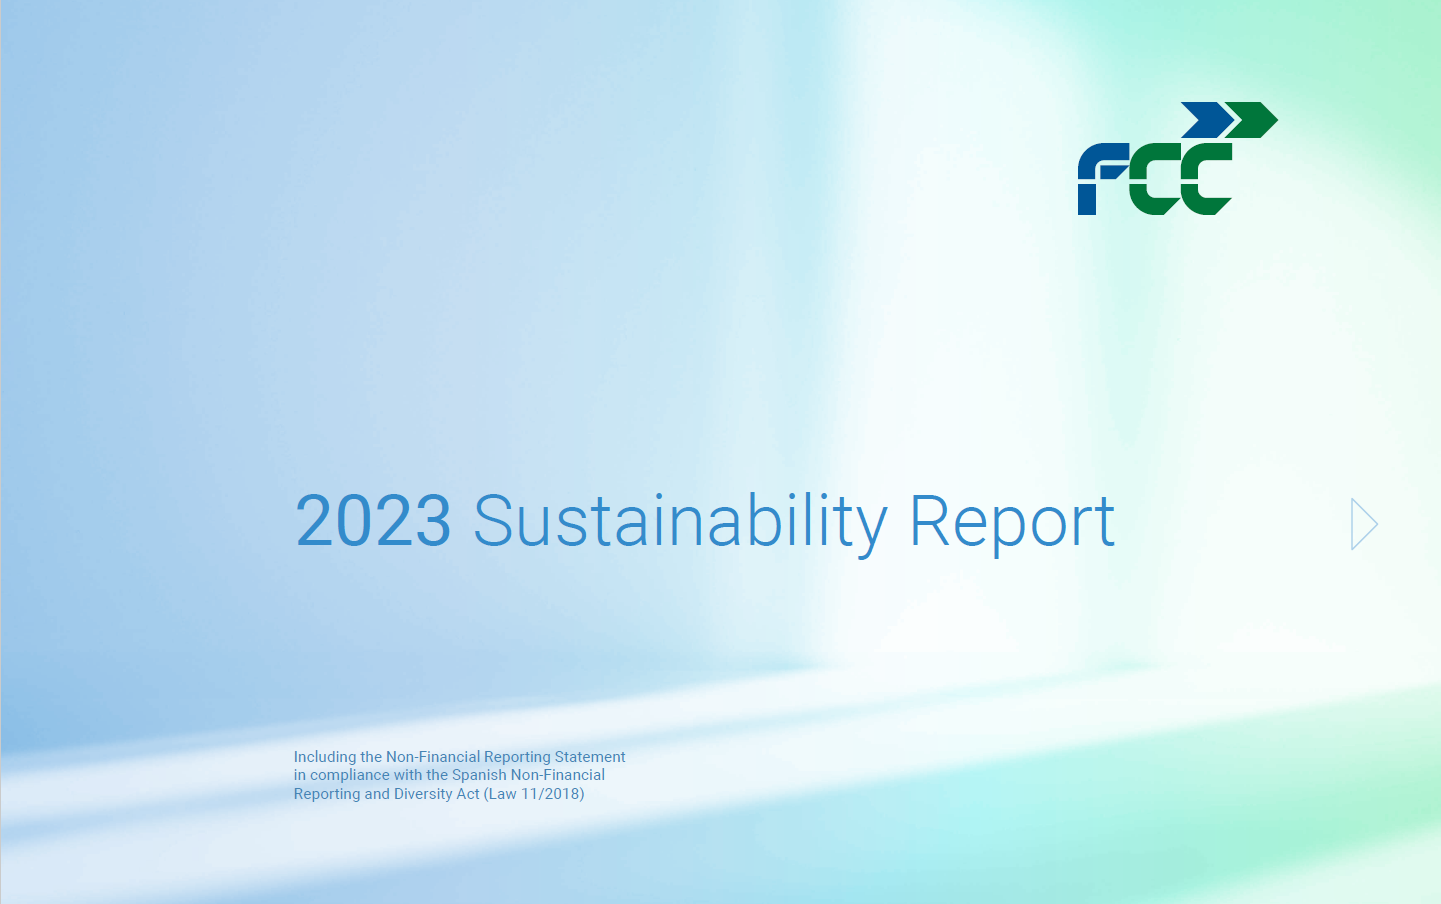 FCC Group 2022 Sustainability Report